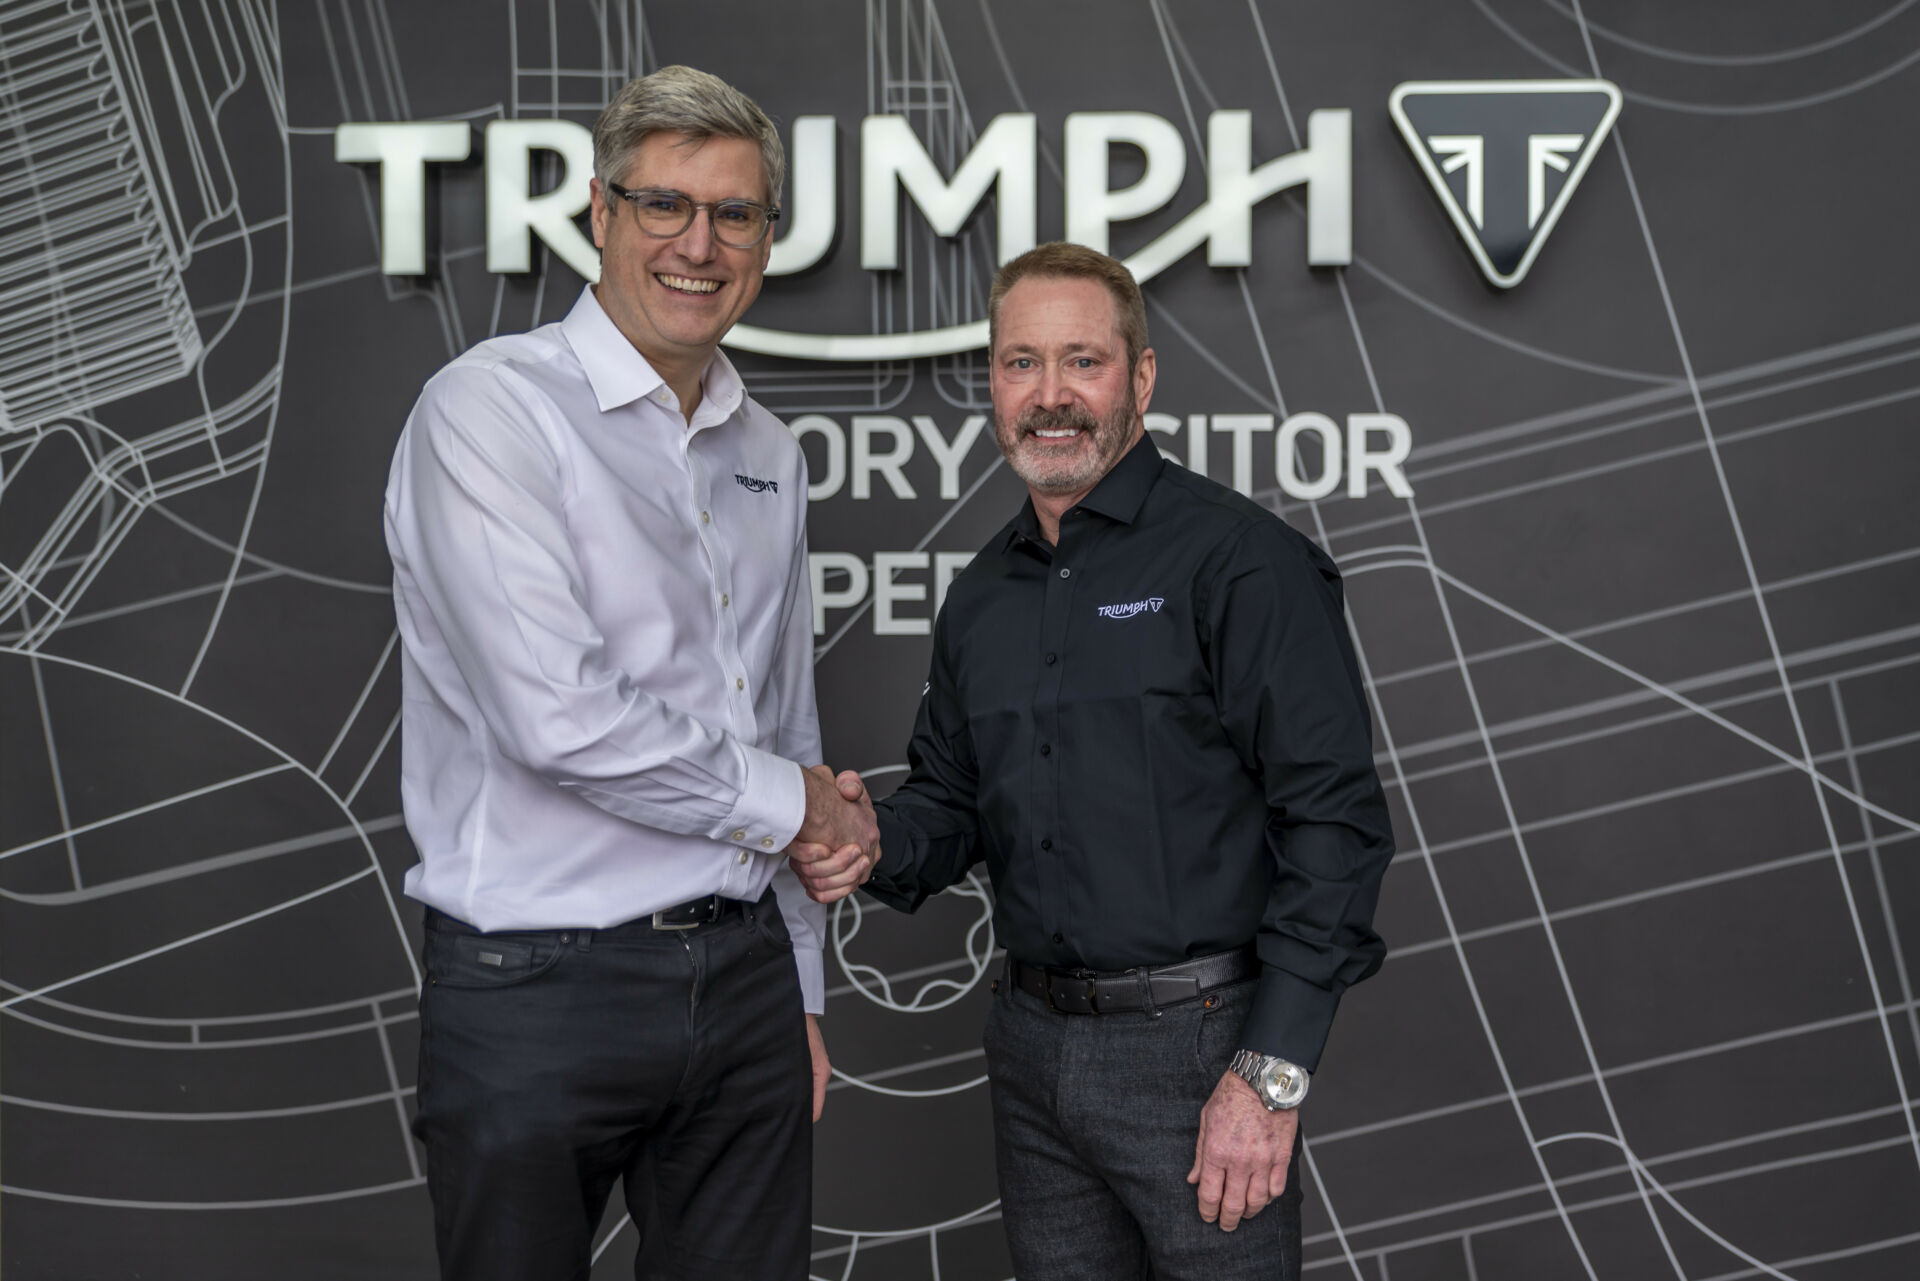 Triumph CEO Nick Bloor (left) and Bobby Hewitt, Team Principal, Triumph Racing, Supercross & Motocross (right). Photo courtesy Triumph Motorcycles.